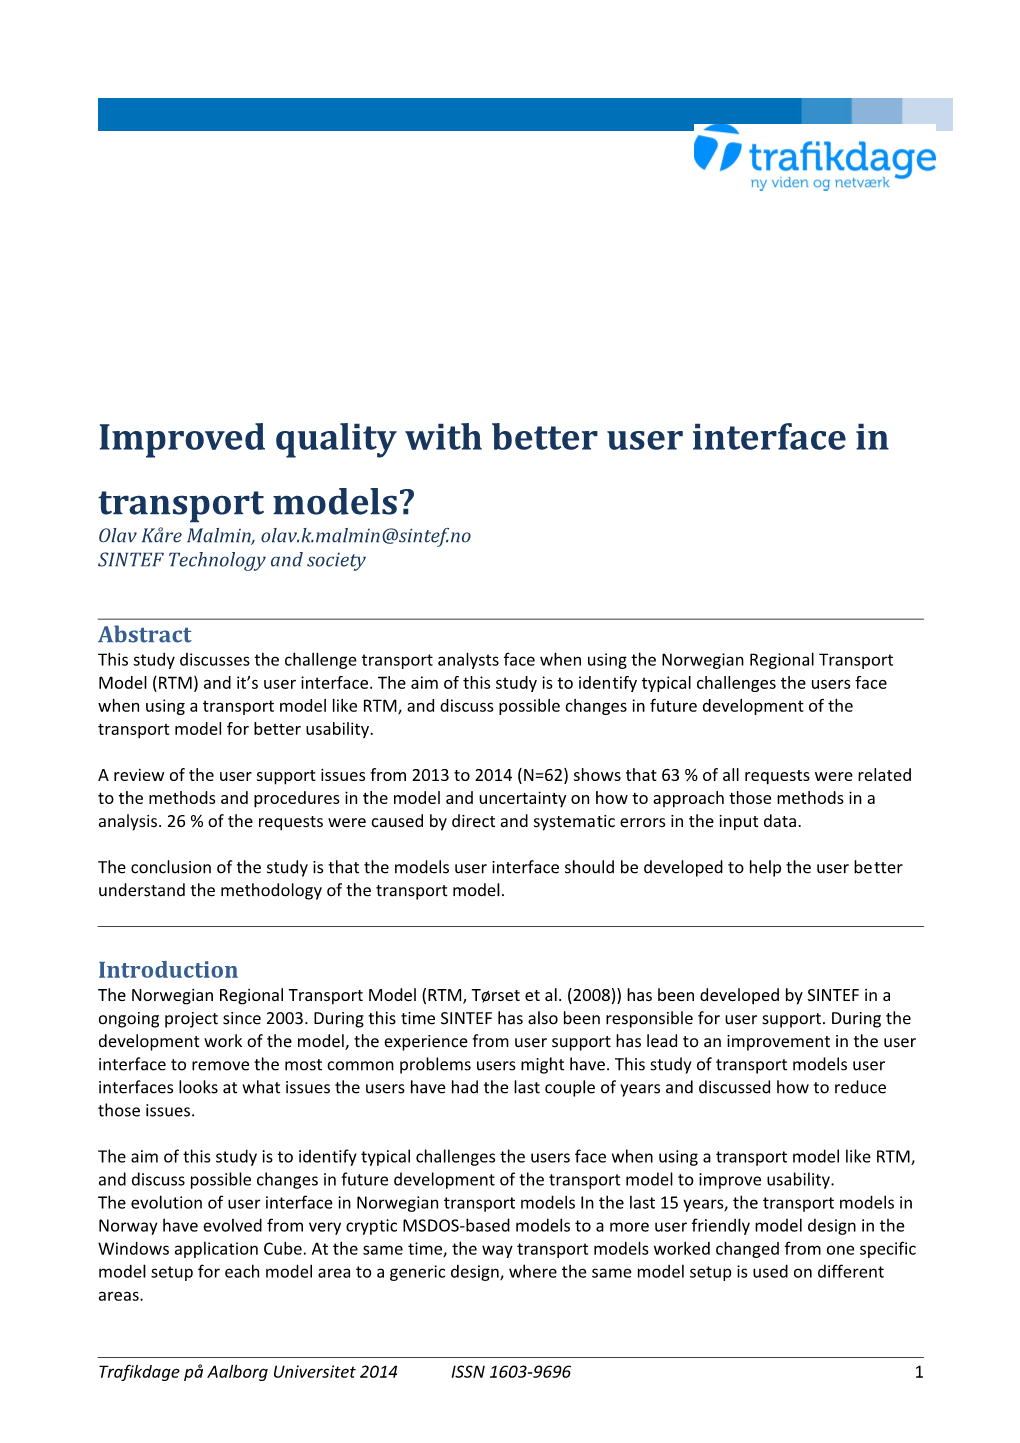 Improved Quality with Better User Interface In